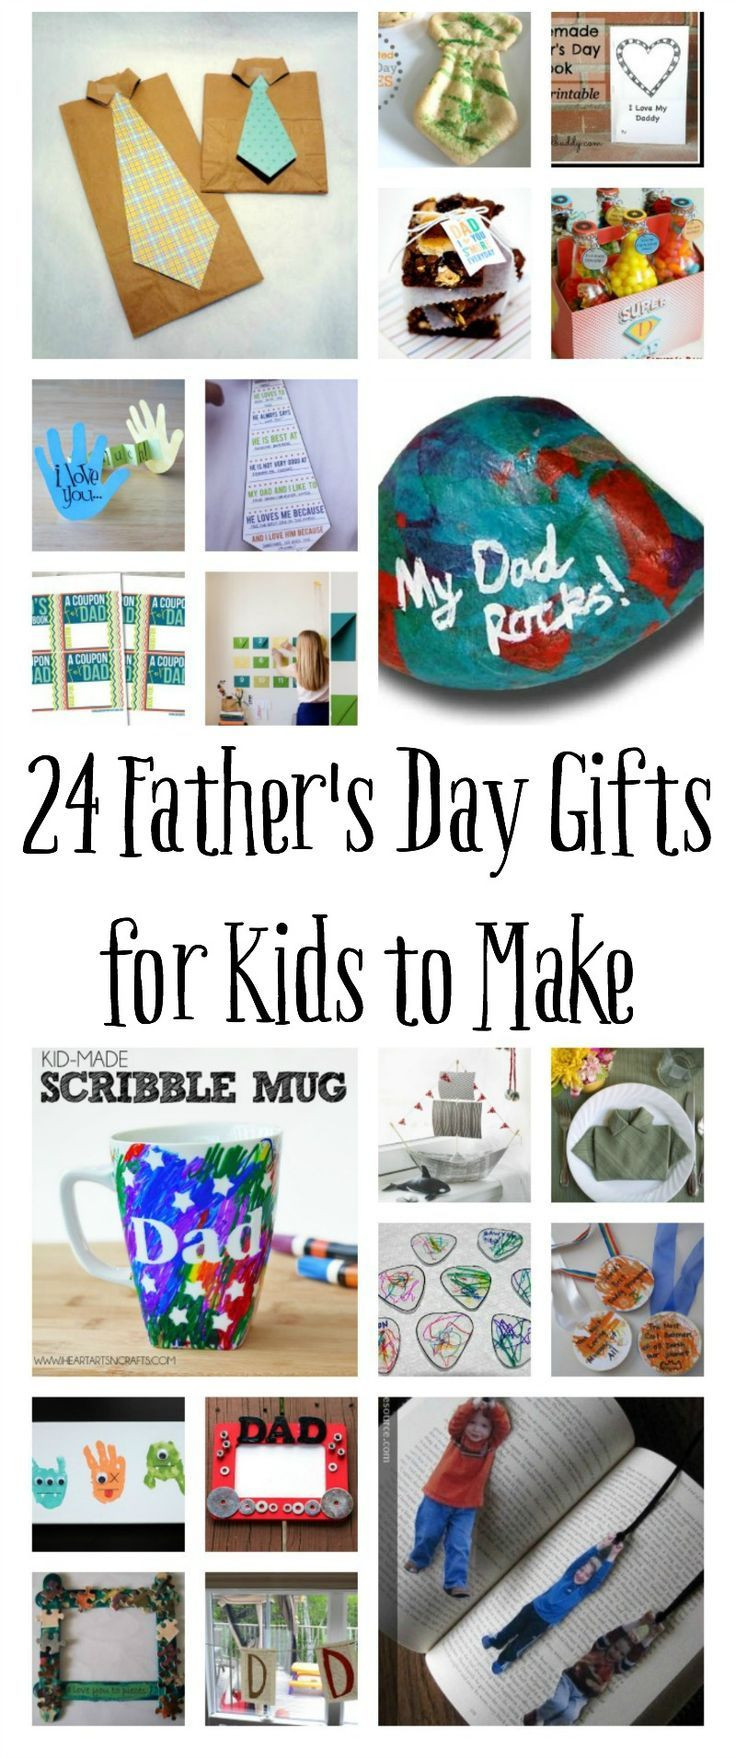 Gift Ideas For Dad From Kids
 100 Homemade Father s Day Gifts for Kids to Make